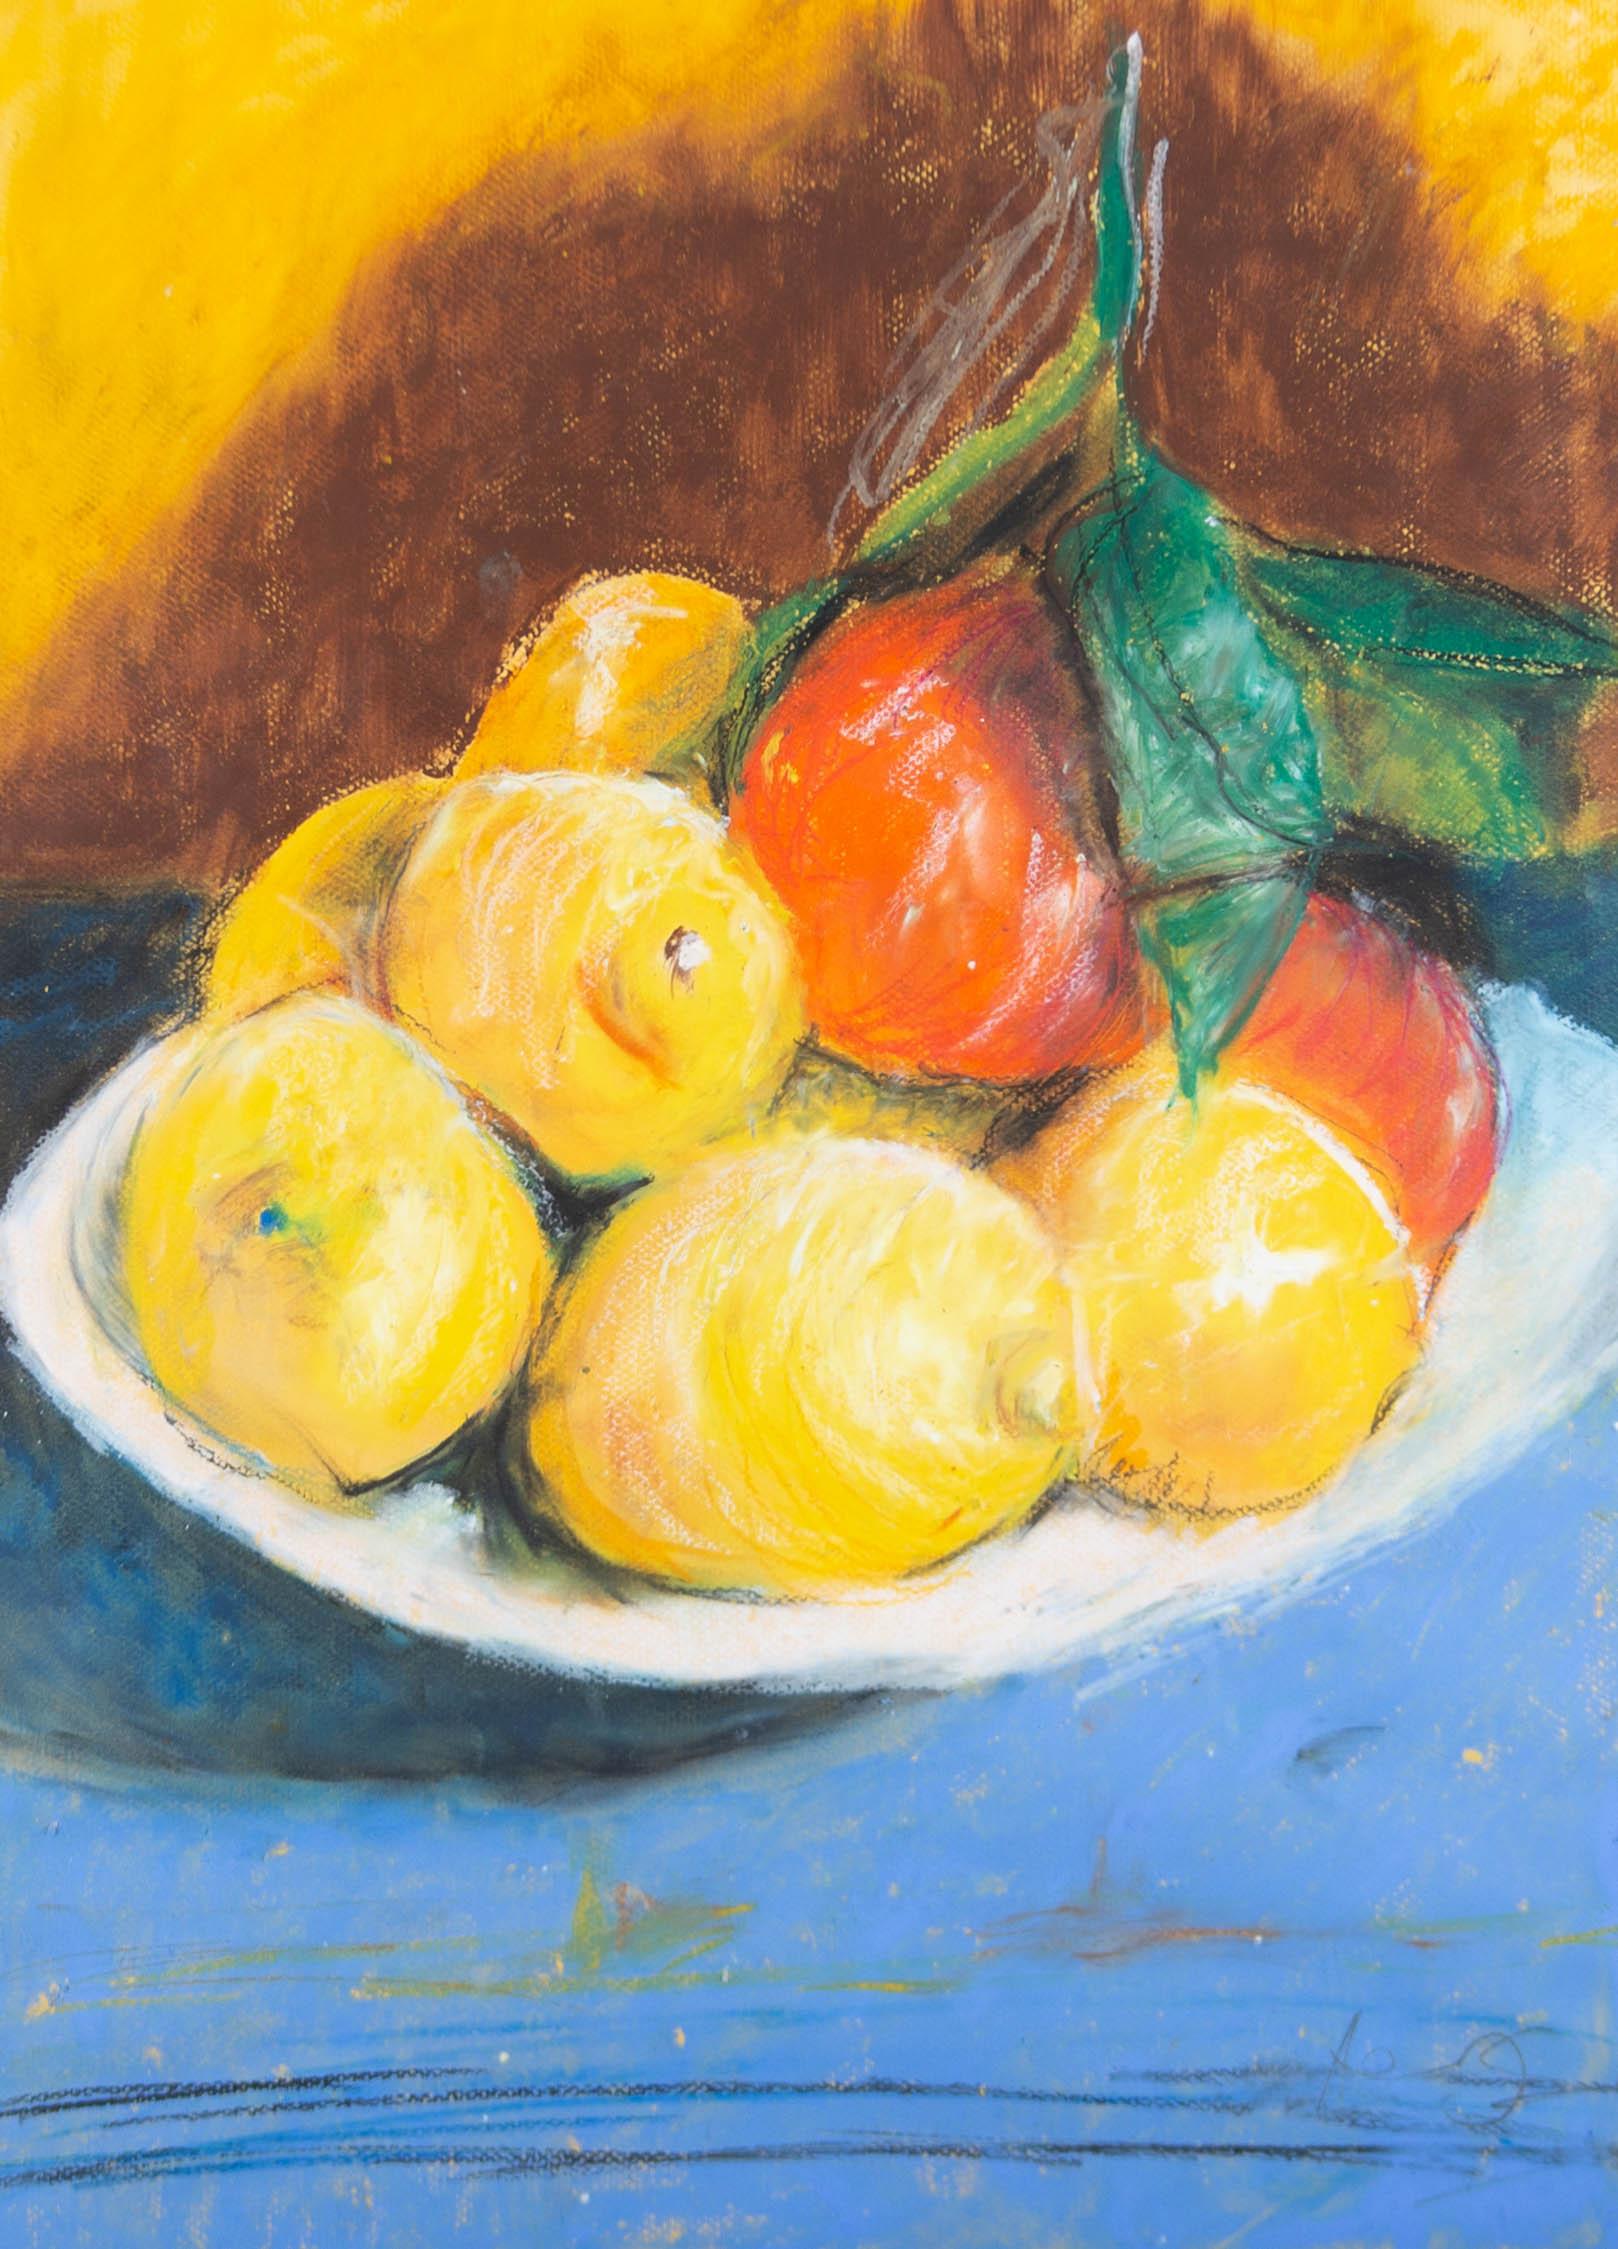 Framed Contemporary Oil Pastel - Lemons in a Bowl - Art by Unknown